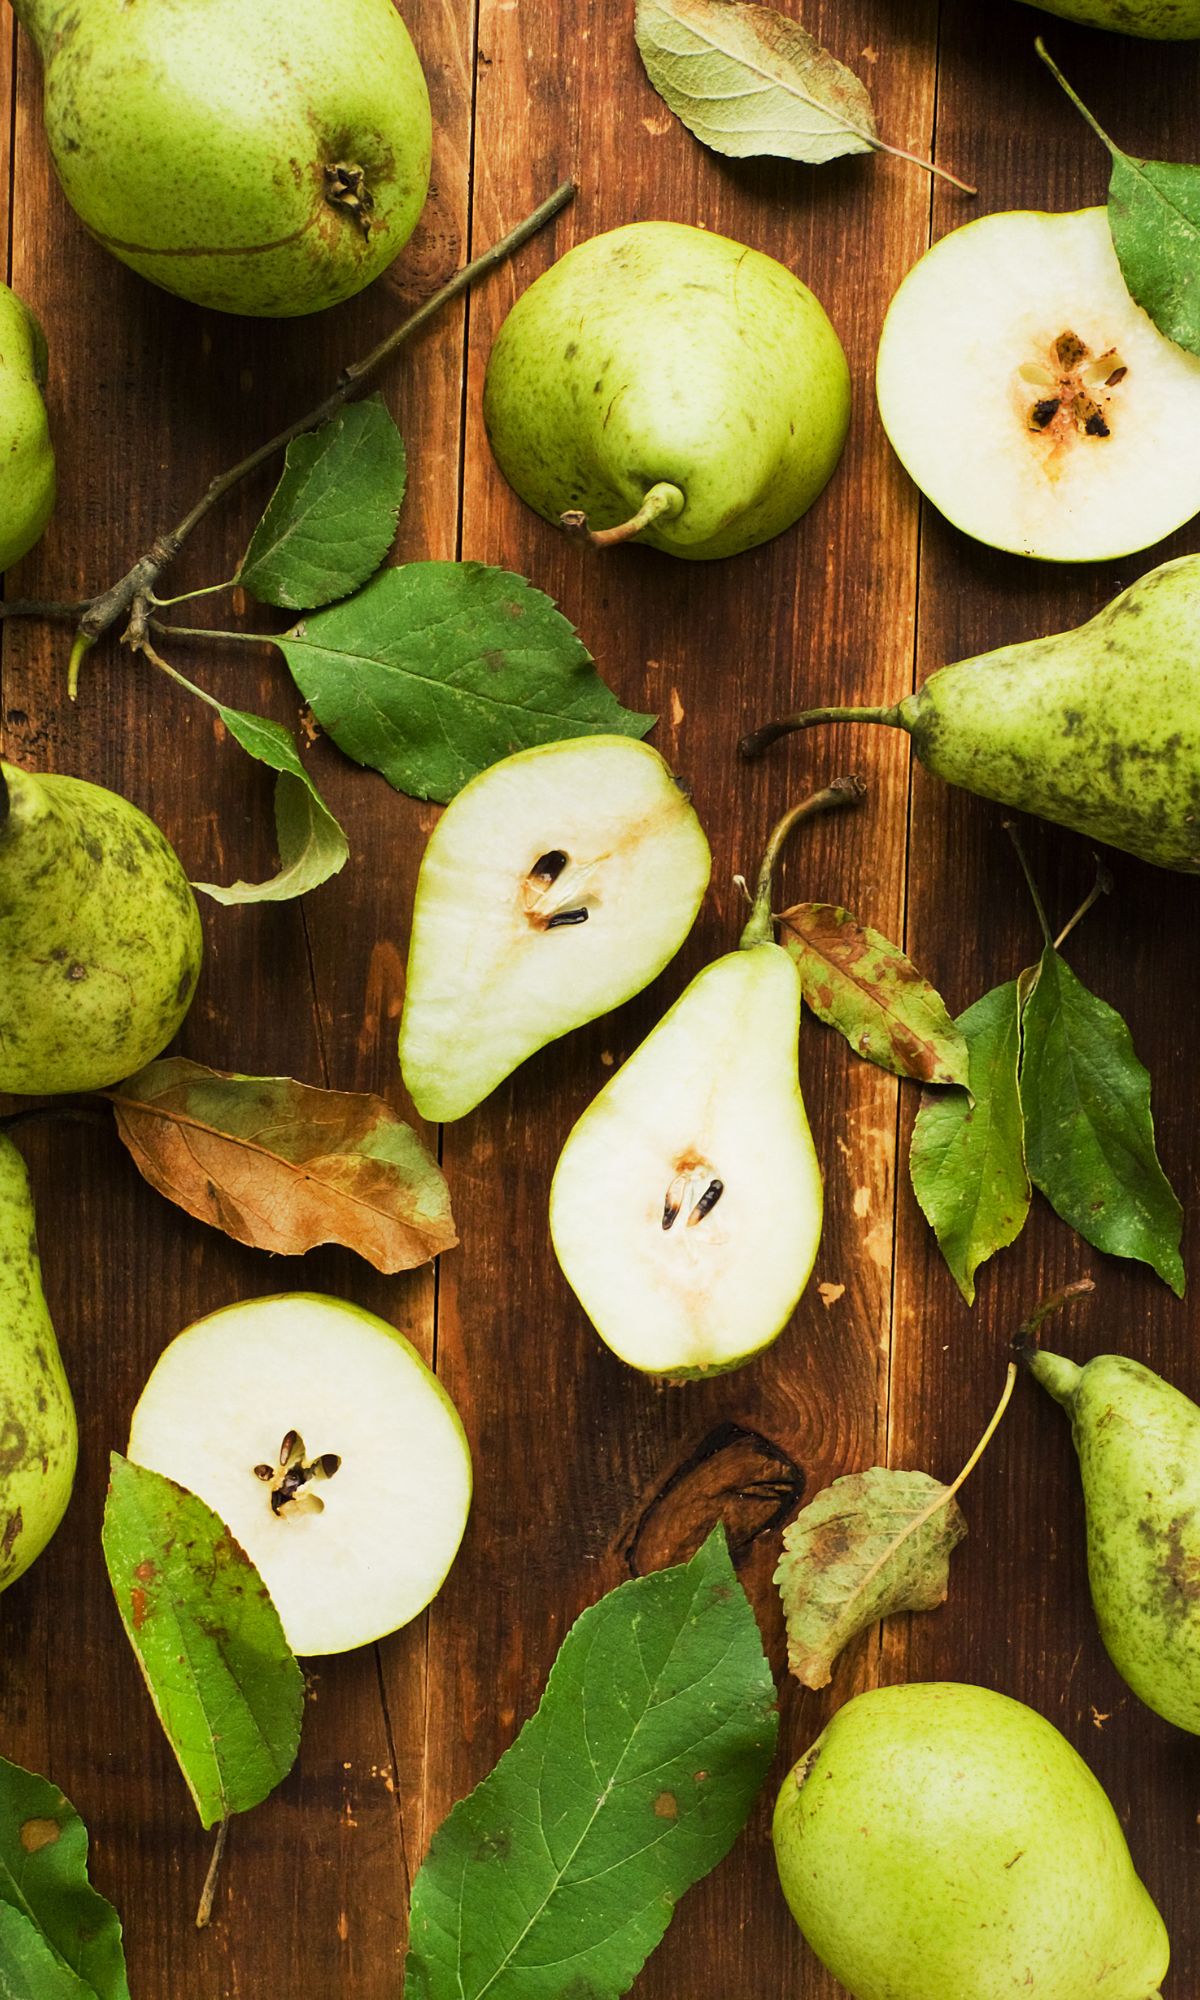 Green Fruit Names: Top Fruits That Are Both Healthy and Delicious